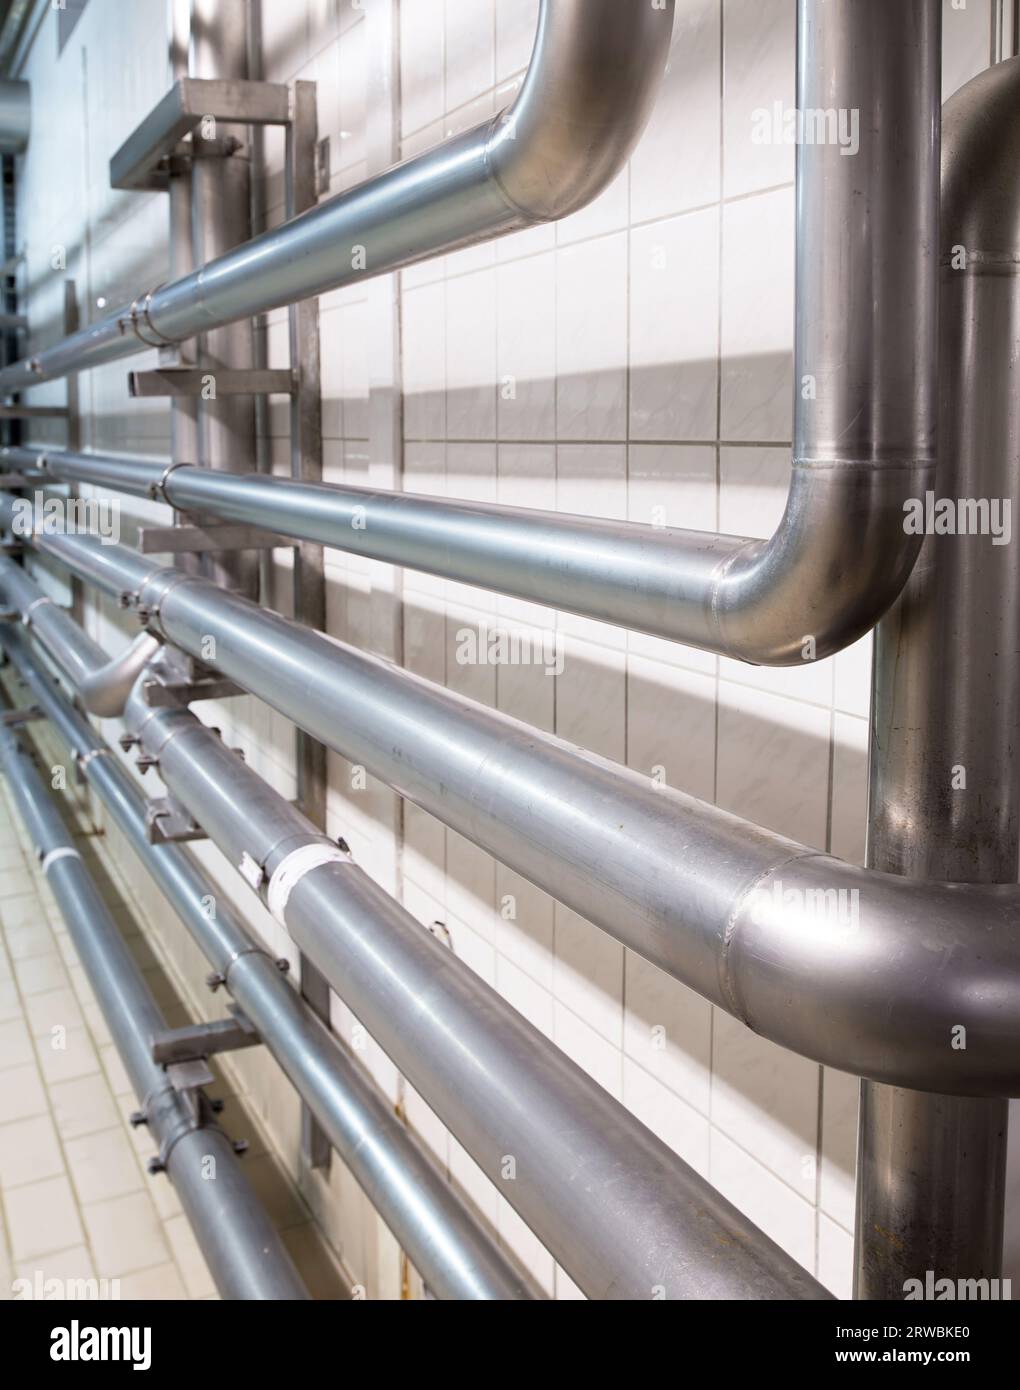 metal pipes and tubes in an industrial plant Stock Photo